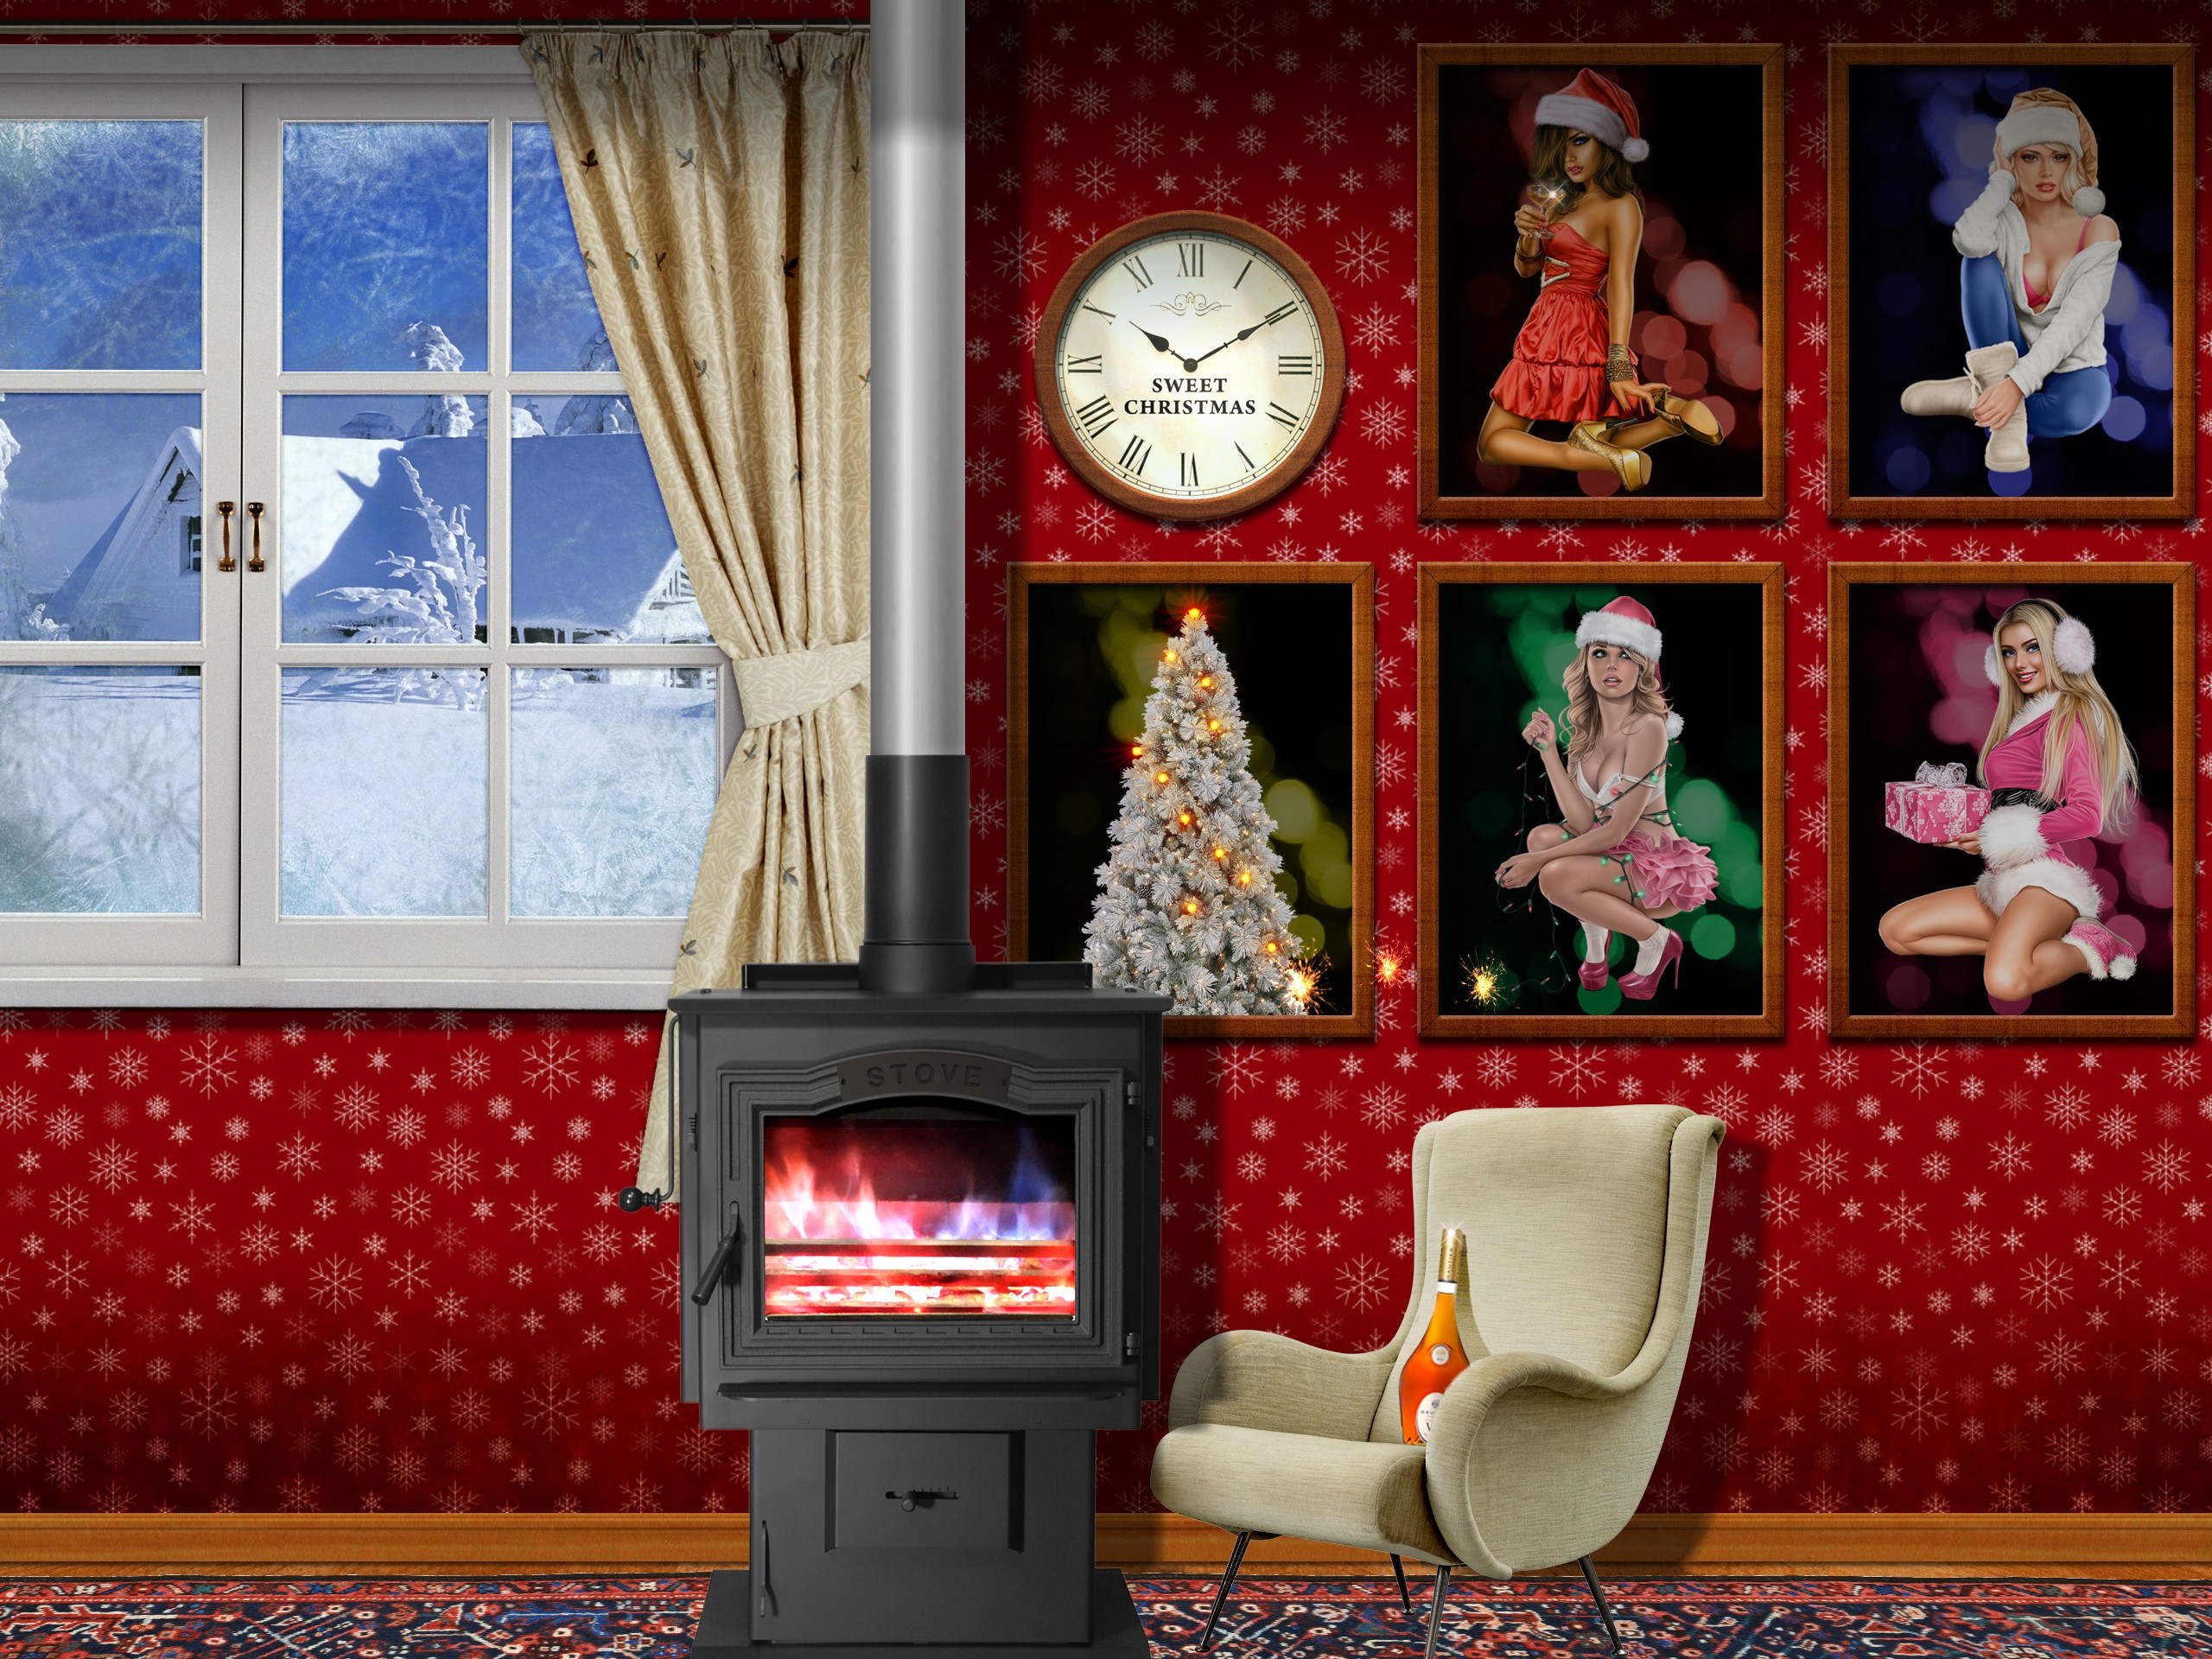 women, Christmas, Wall, Room, Stove, Window, Winter, Picture frames, Clocks, Snow, Pine trees, Cognac, Glasses, Chair, Carpets, Curtains, Spark, Fire Wallpaper